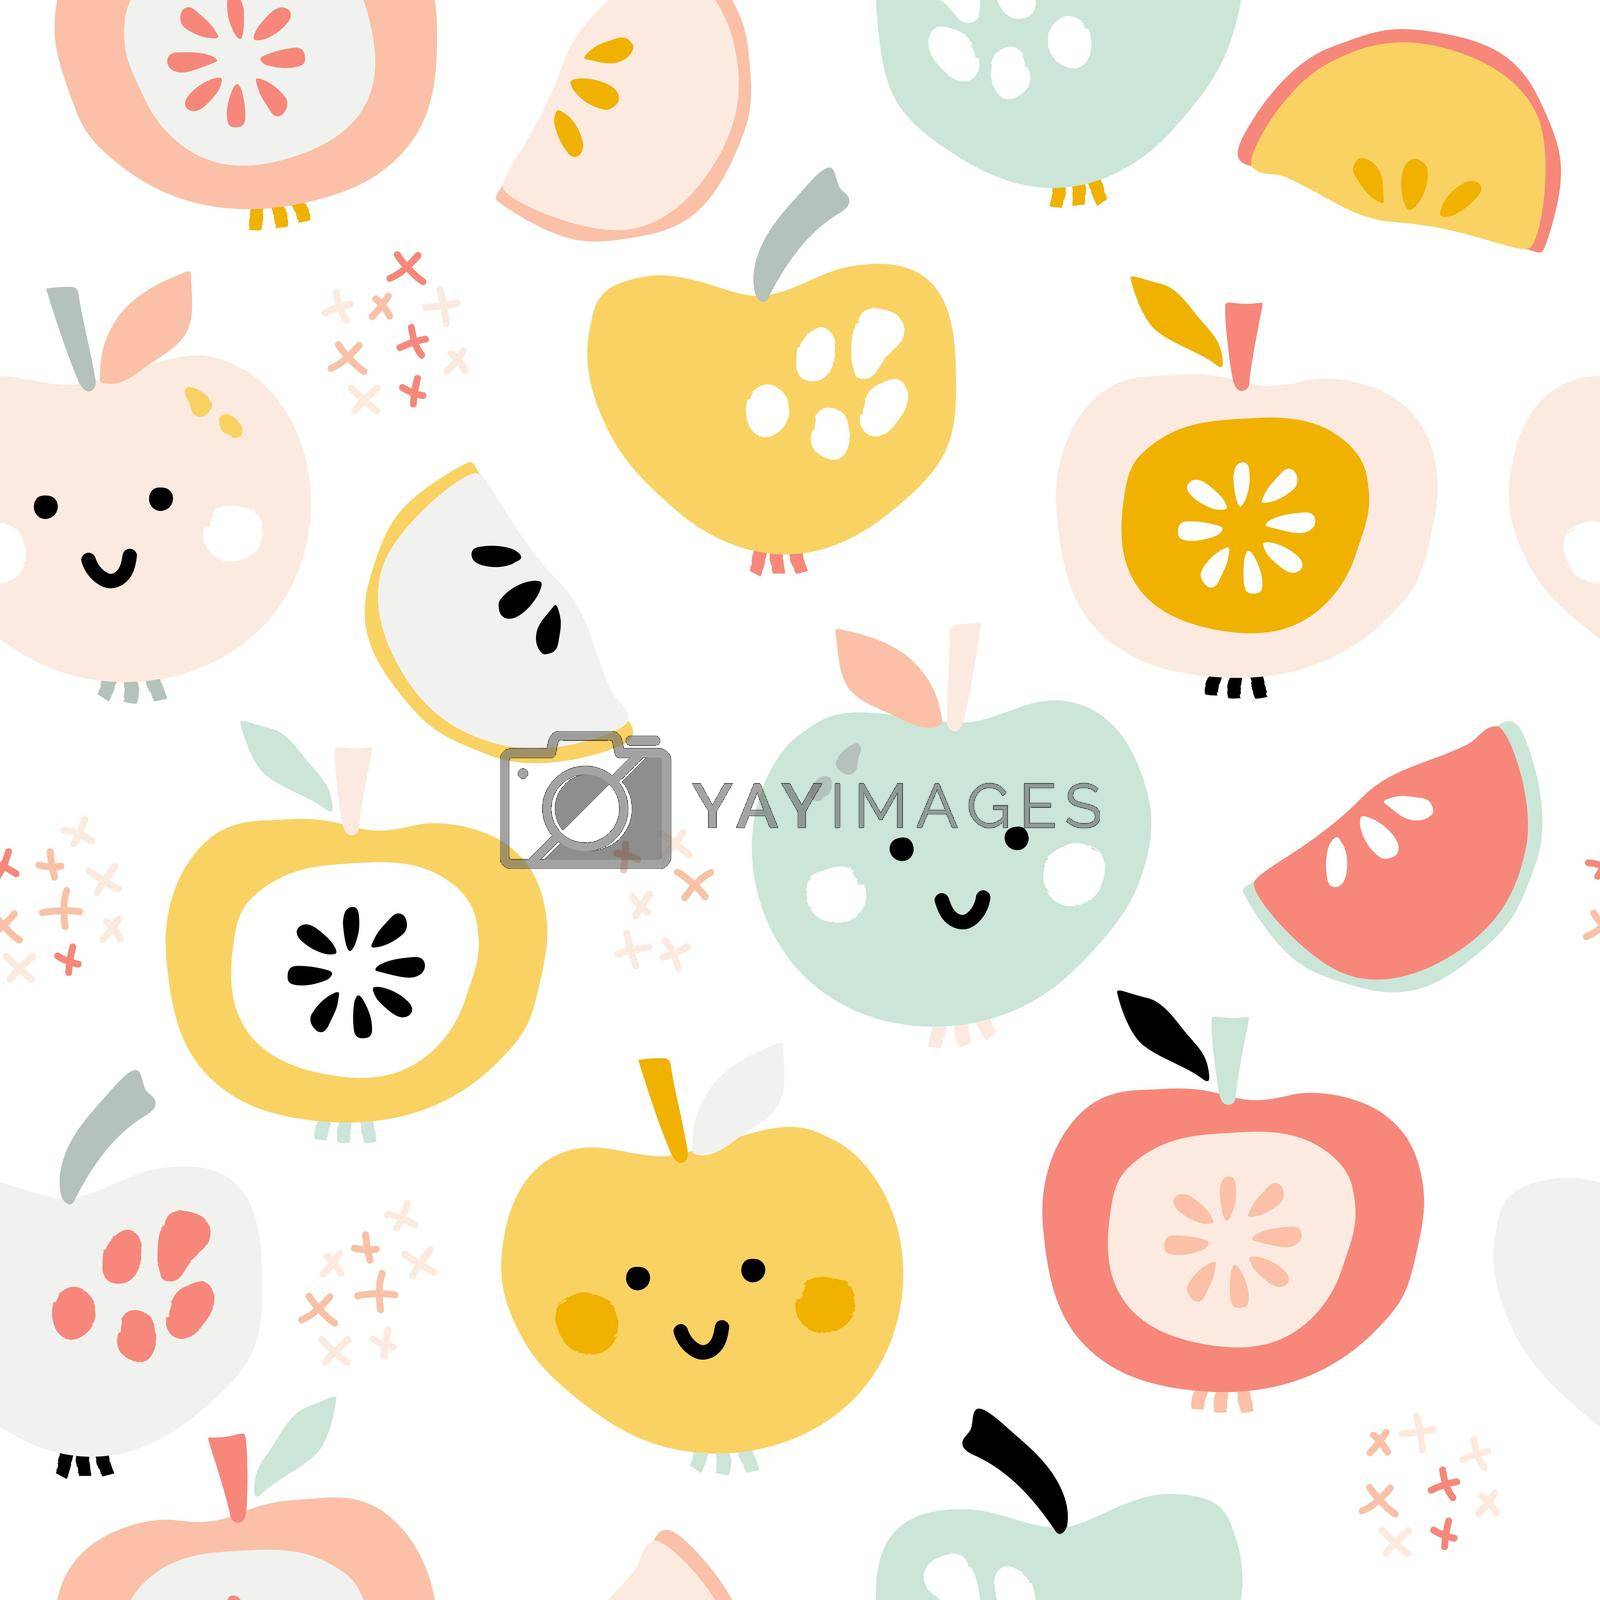 Royalty free image of Fruit print on a white background. Cute hand-drawn smiling apples of different shapes and colors by lera_feeva